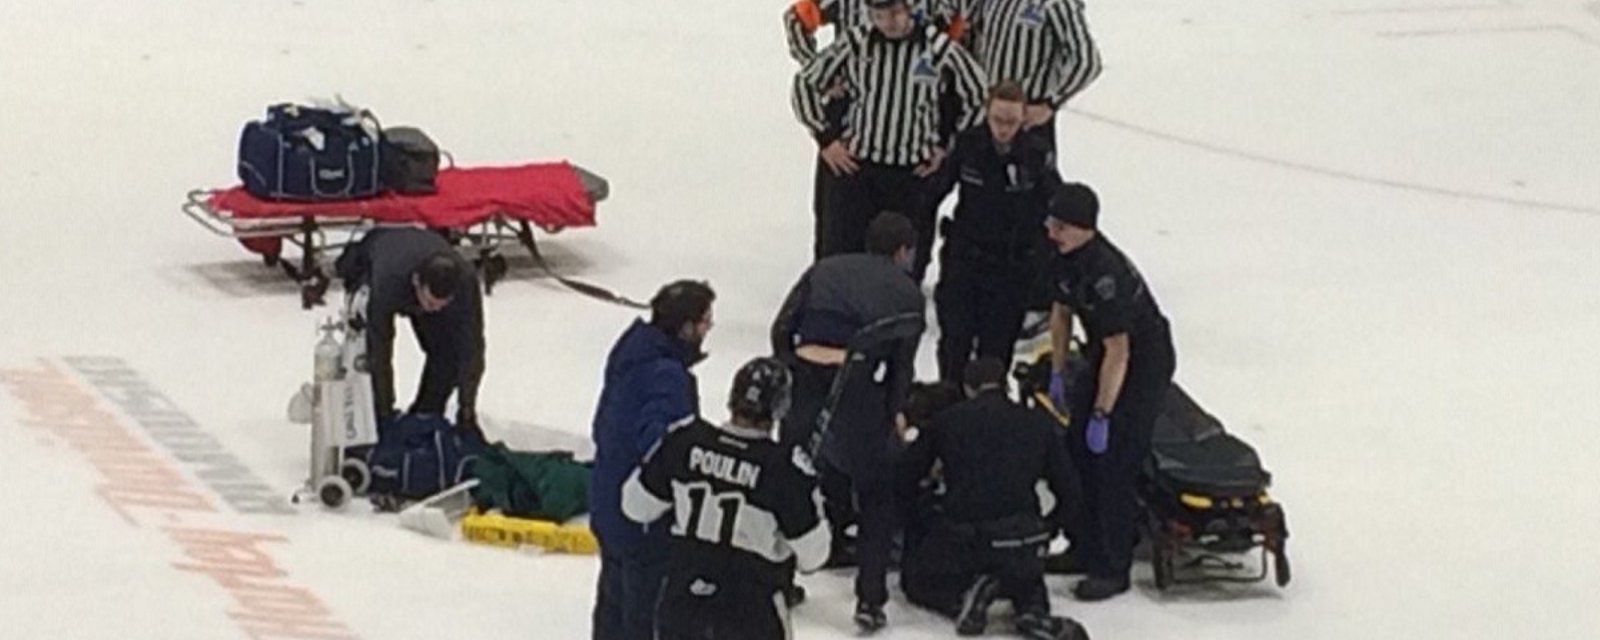 Stretcher brought out and teams sent to the back after player is knocked out cold.